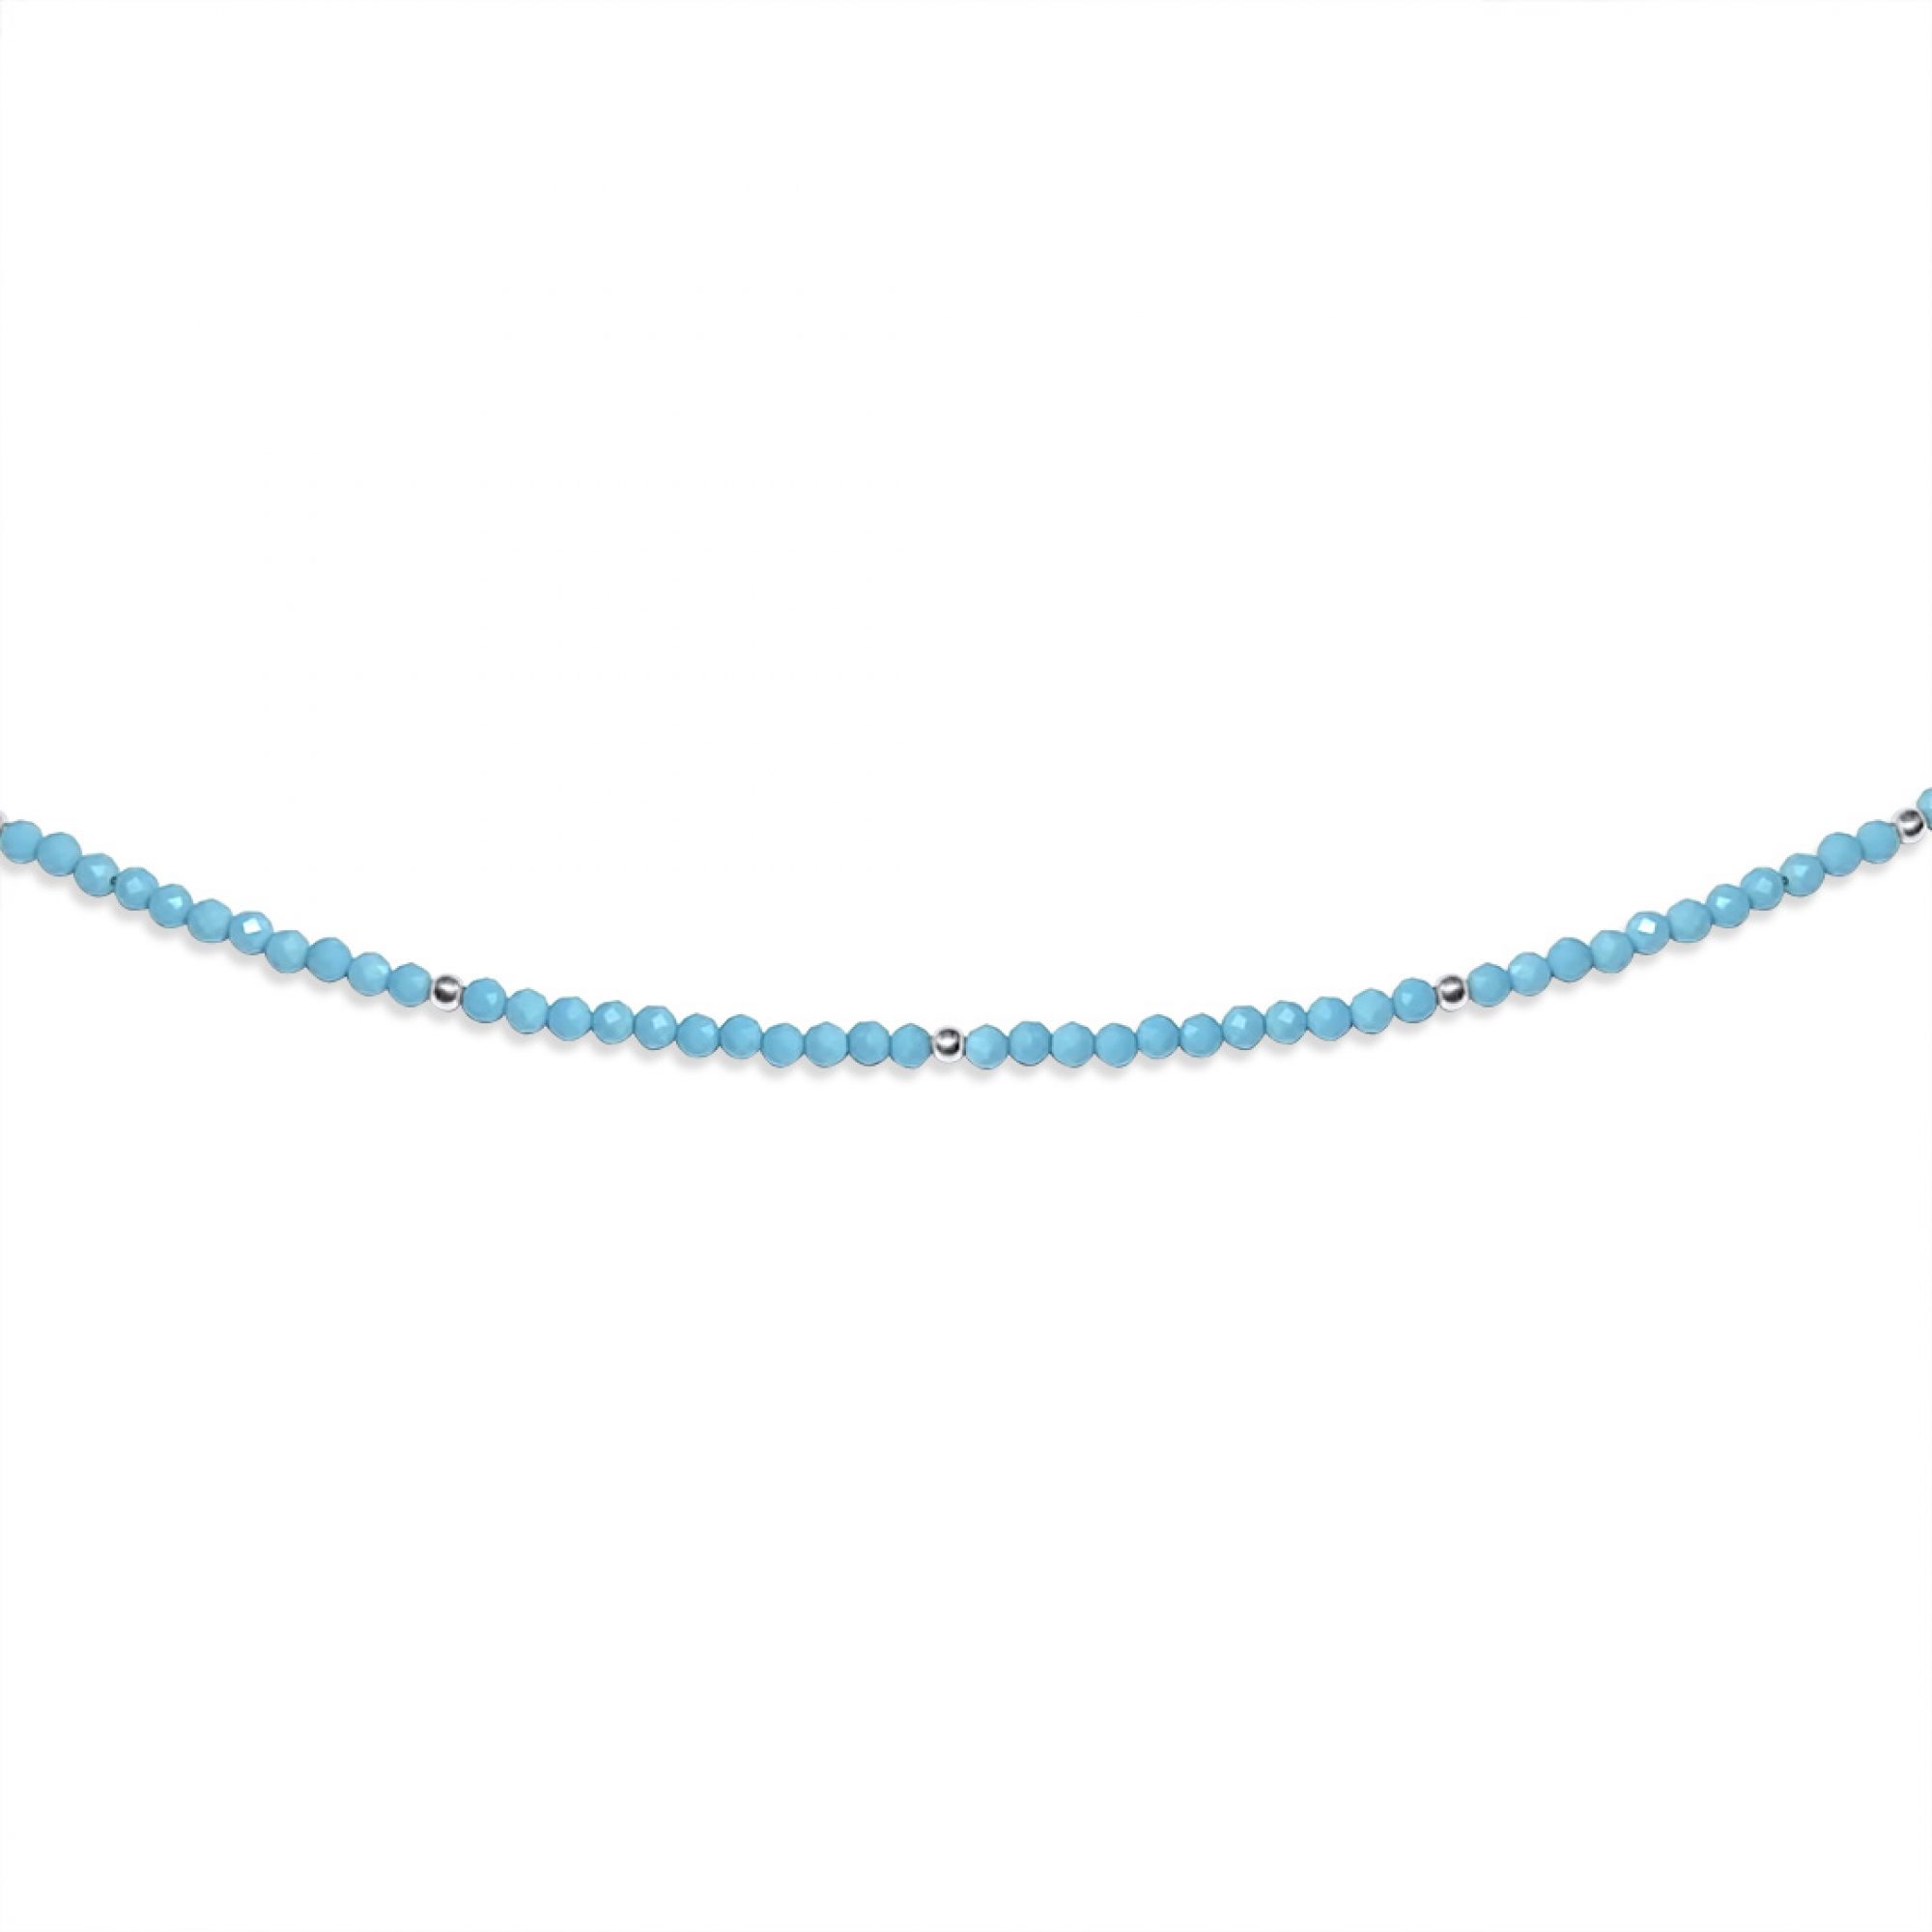 Anklet with turquoise beads